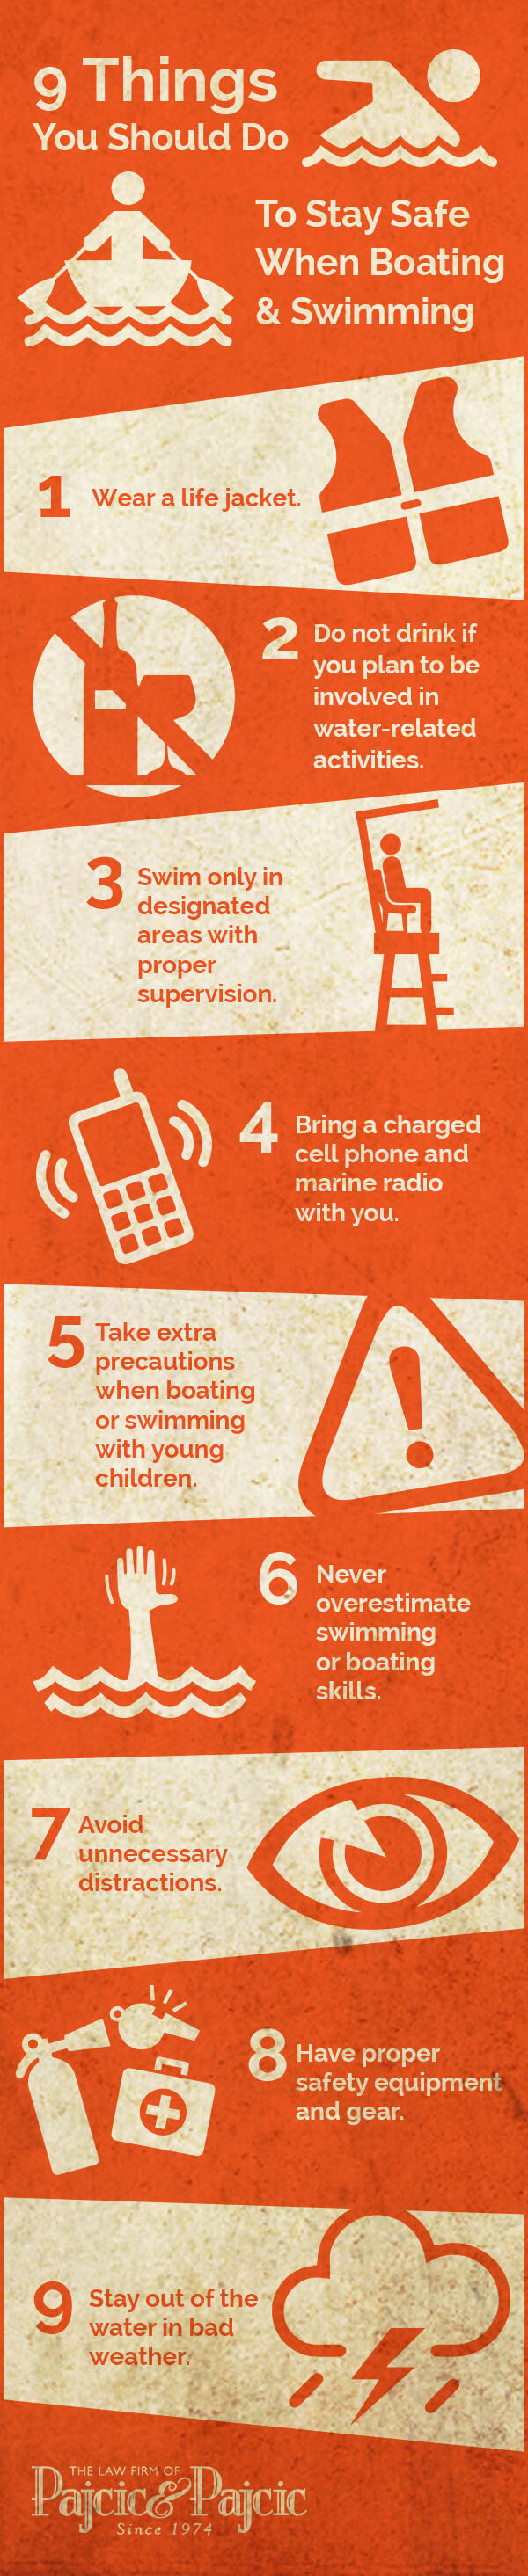 9 Things You Should Do to Stay Safe When Boating and Swimming infographic